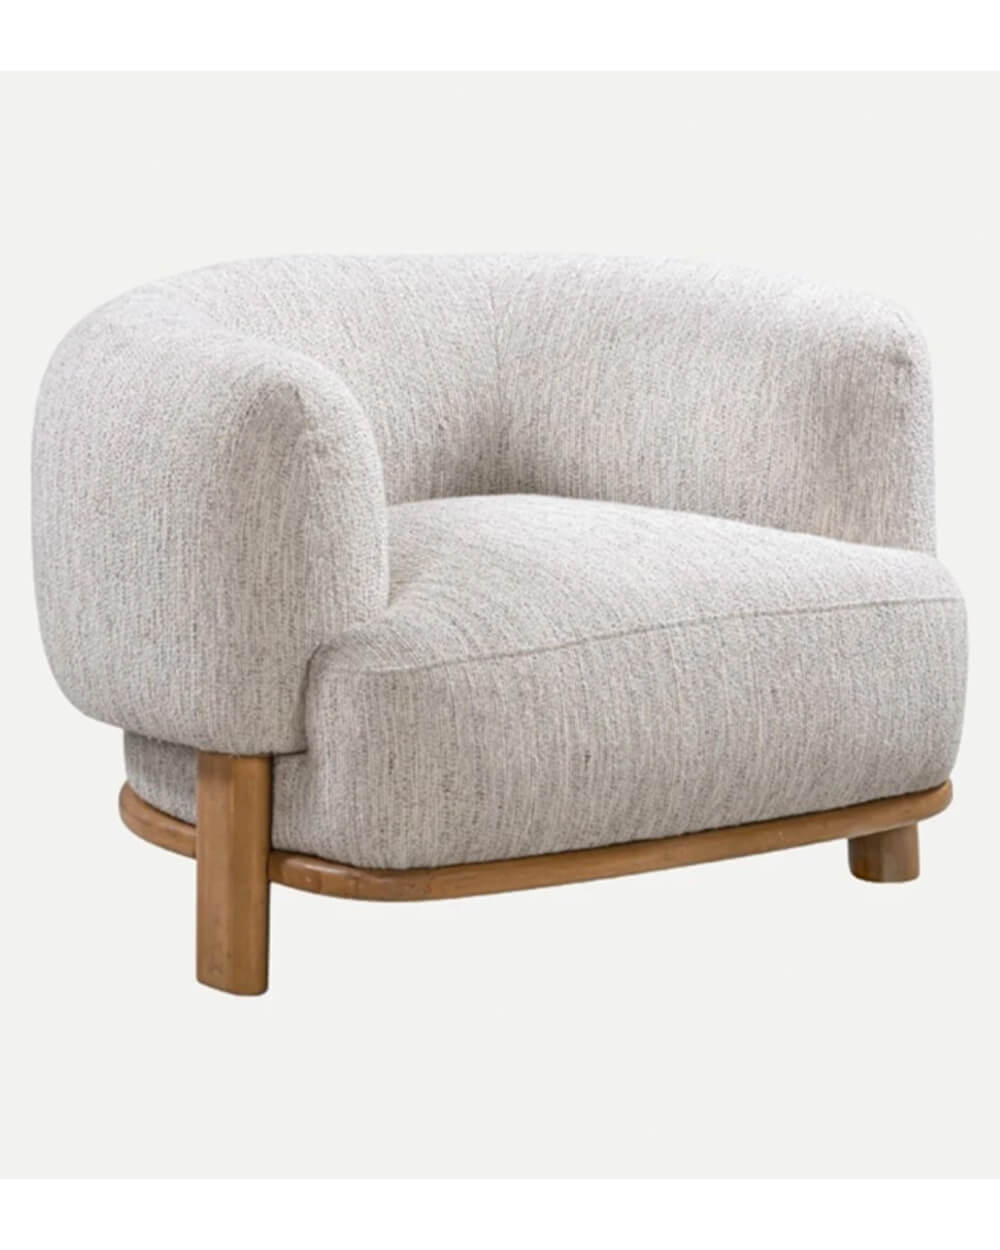 The Citizenry Vanesa Boucle Chair